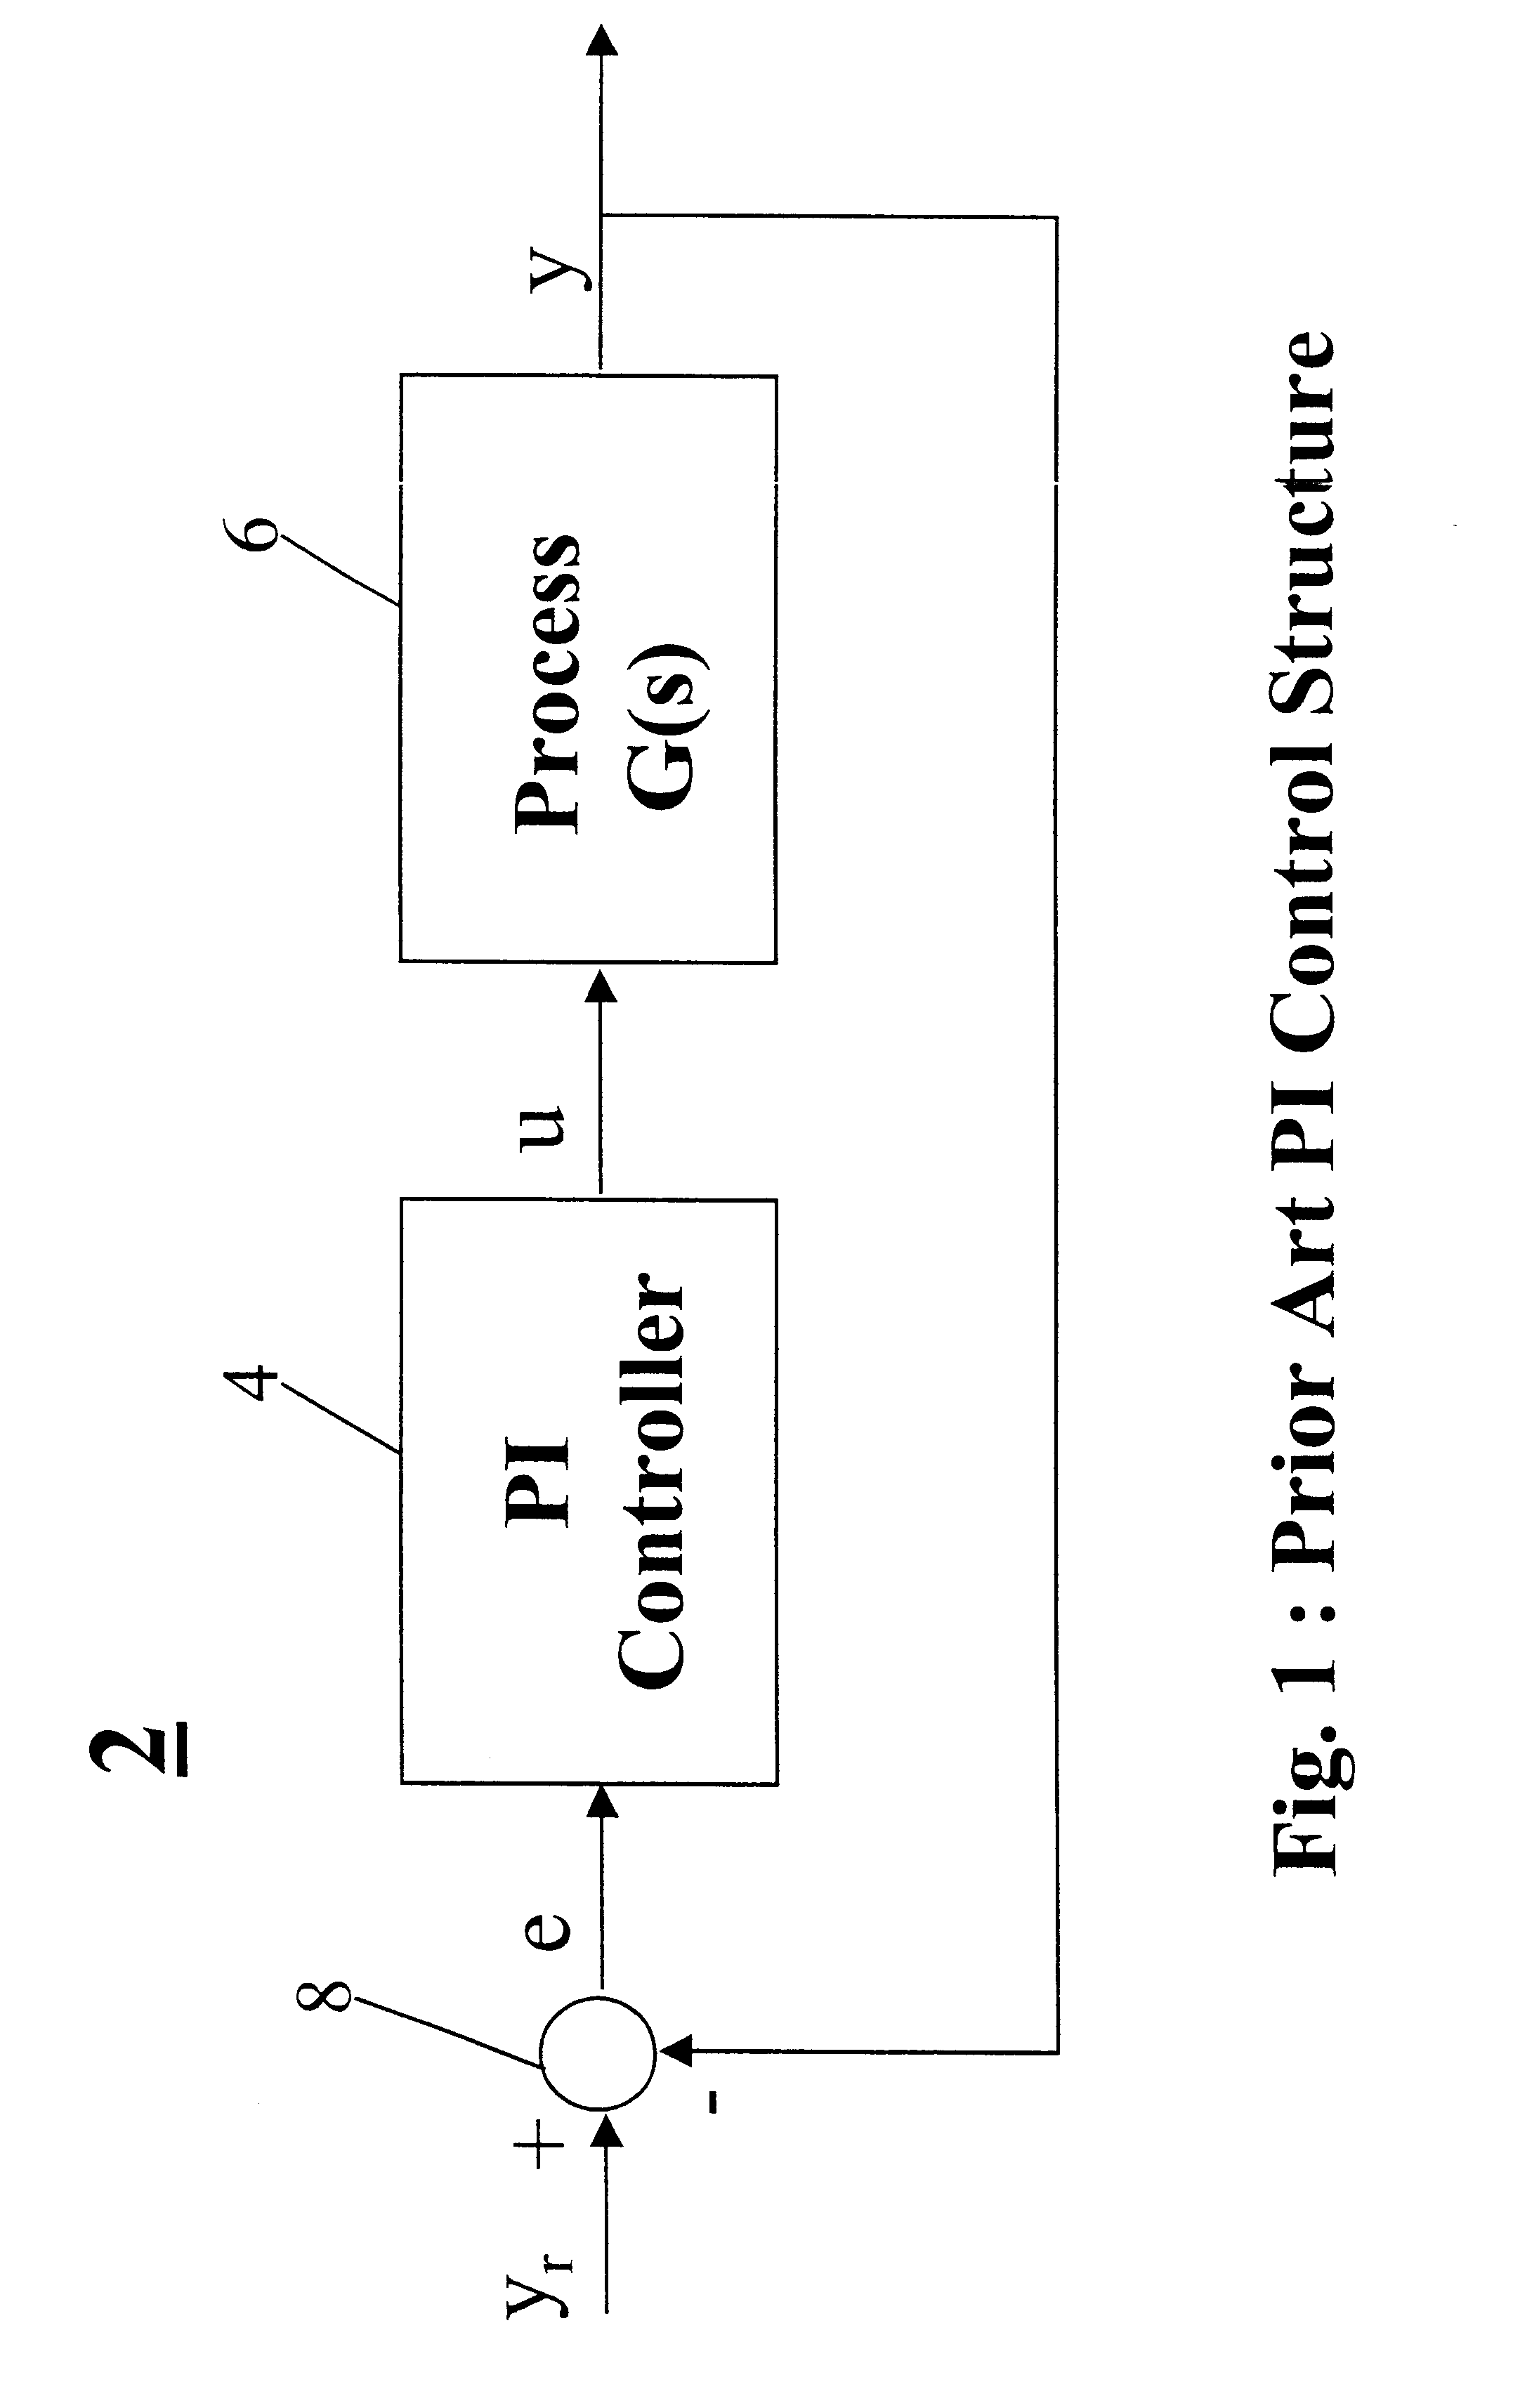 Predictive and self-tuning PI control apparatus for expanded process control applications